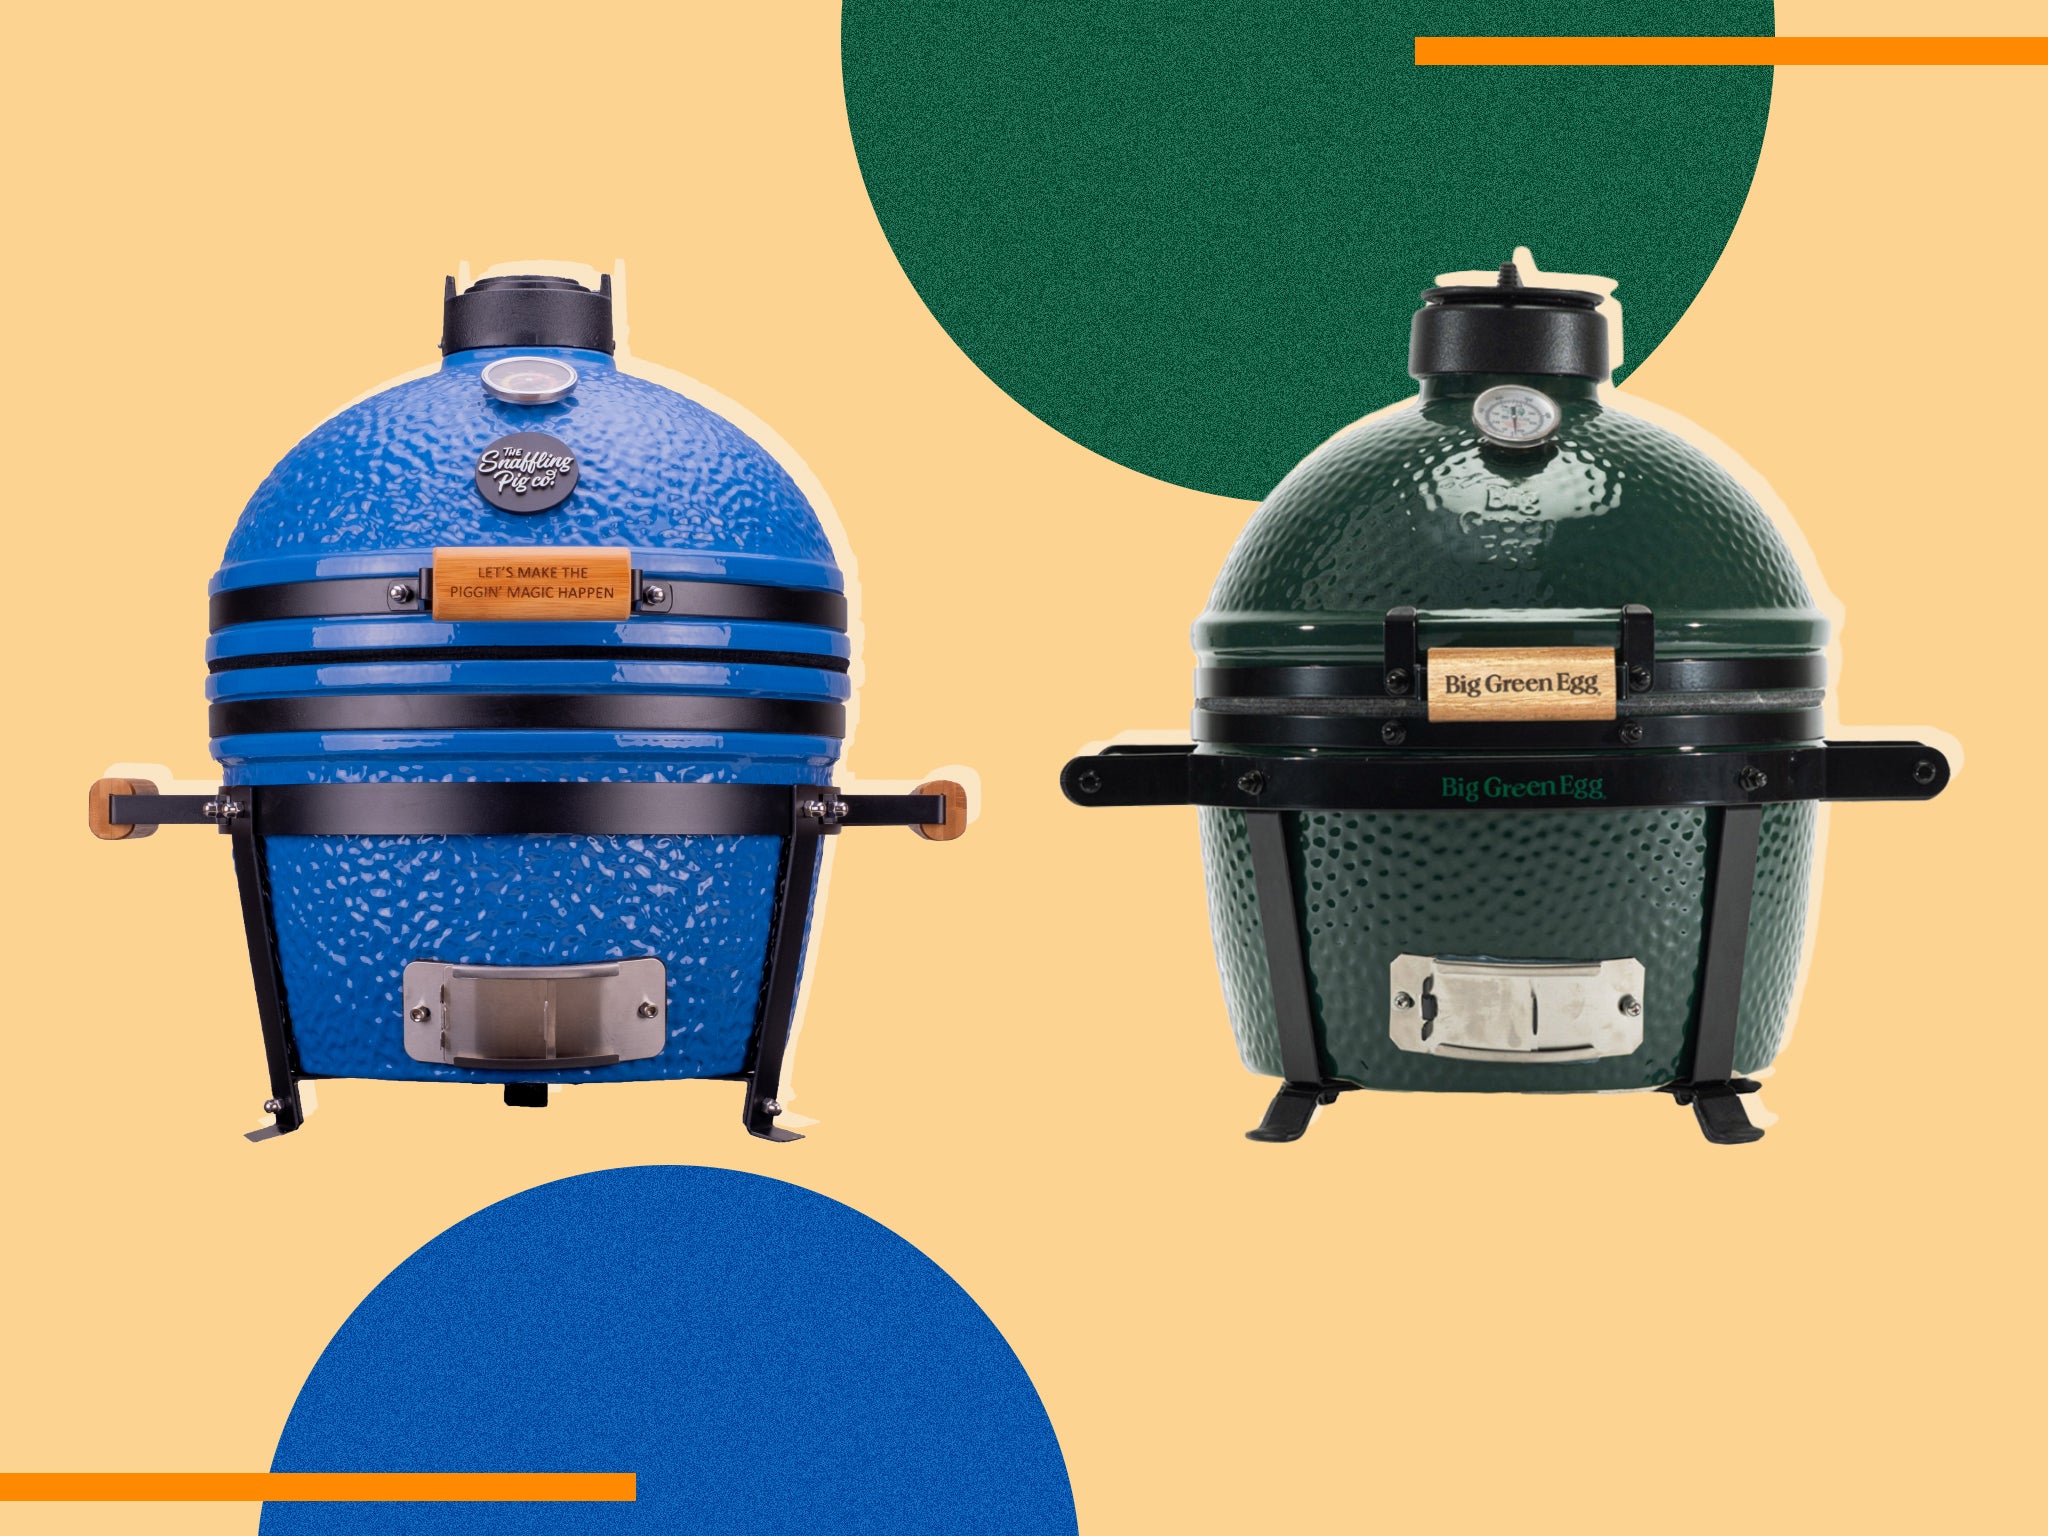 Thanks to the backing of Michelin-starred chefs and celebrity influencers these premium cookers have become the OGs